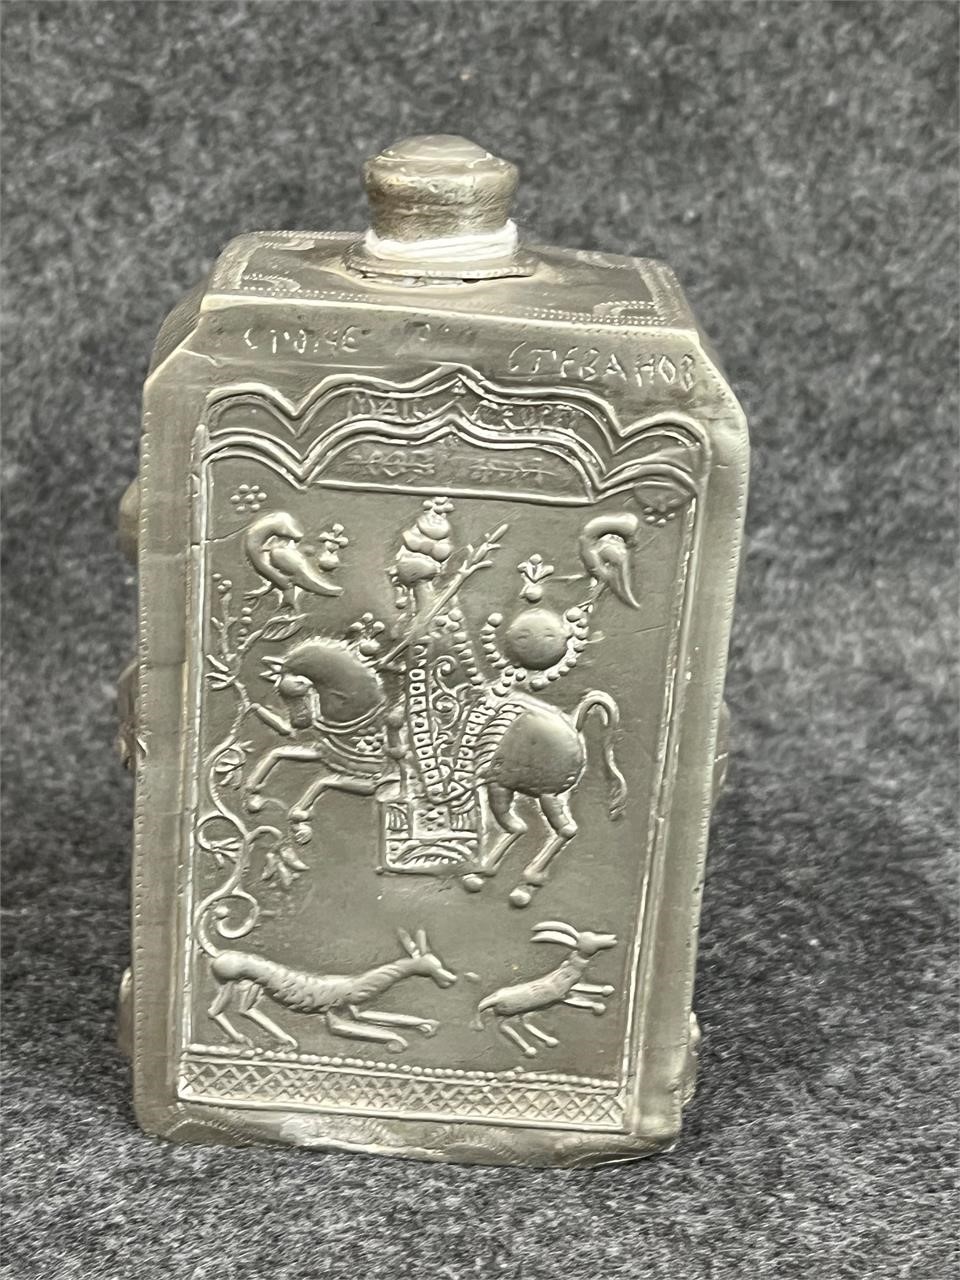 Antique Pewter Decorated Powder Flask